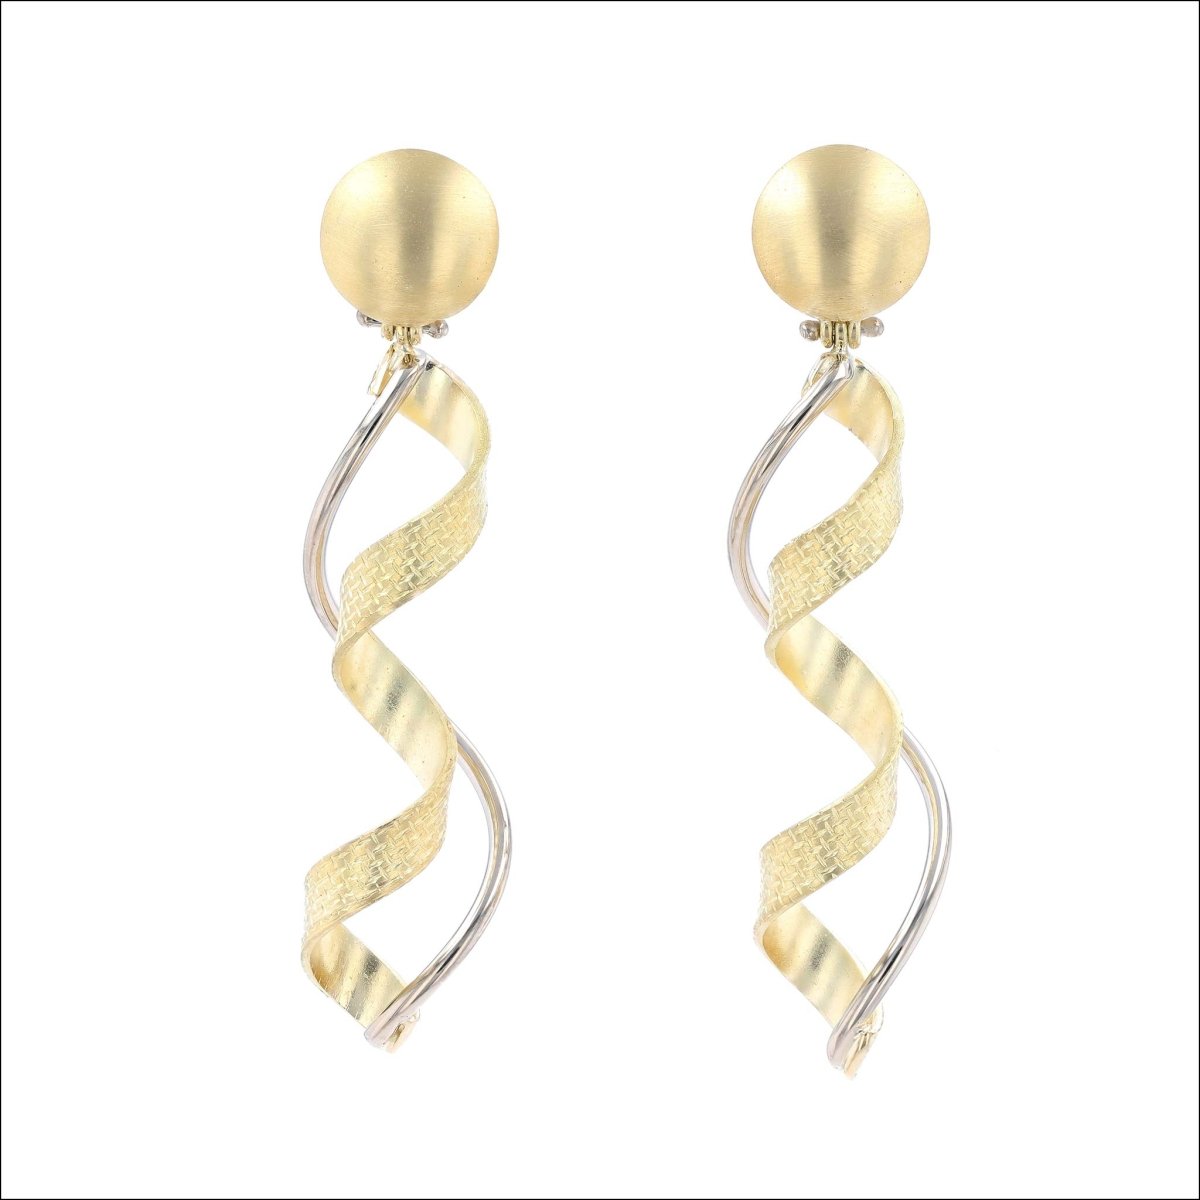 Textured Ribbon Two Tone Helix Earrings 18KY 14KW Entry #5 - JewelsmithEarrings